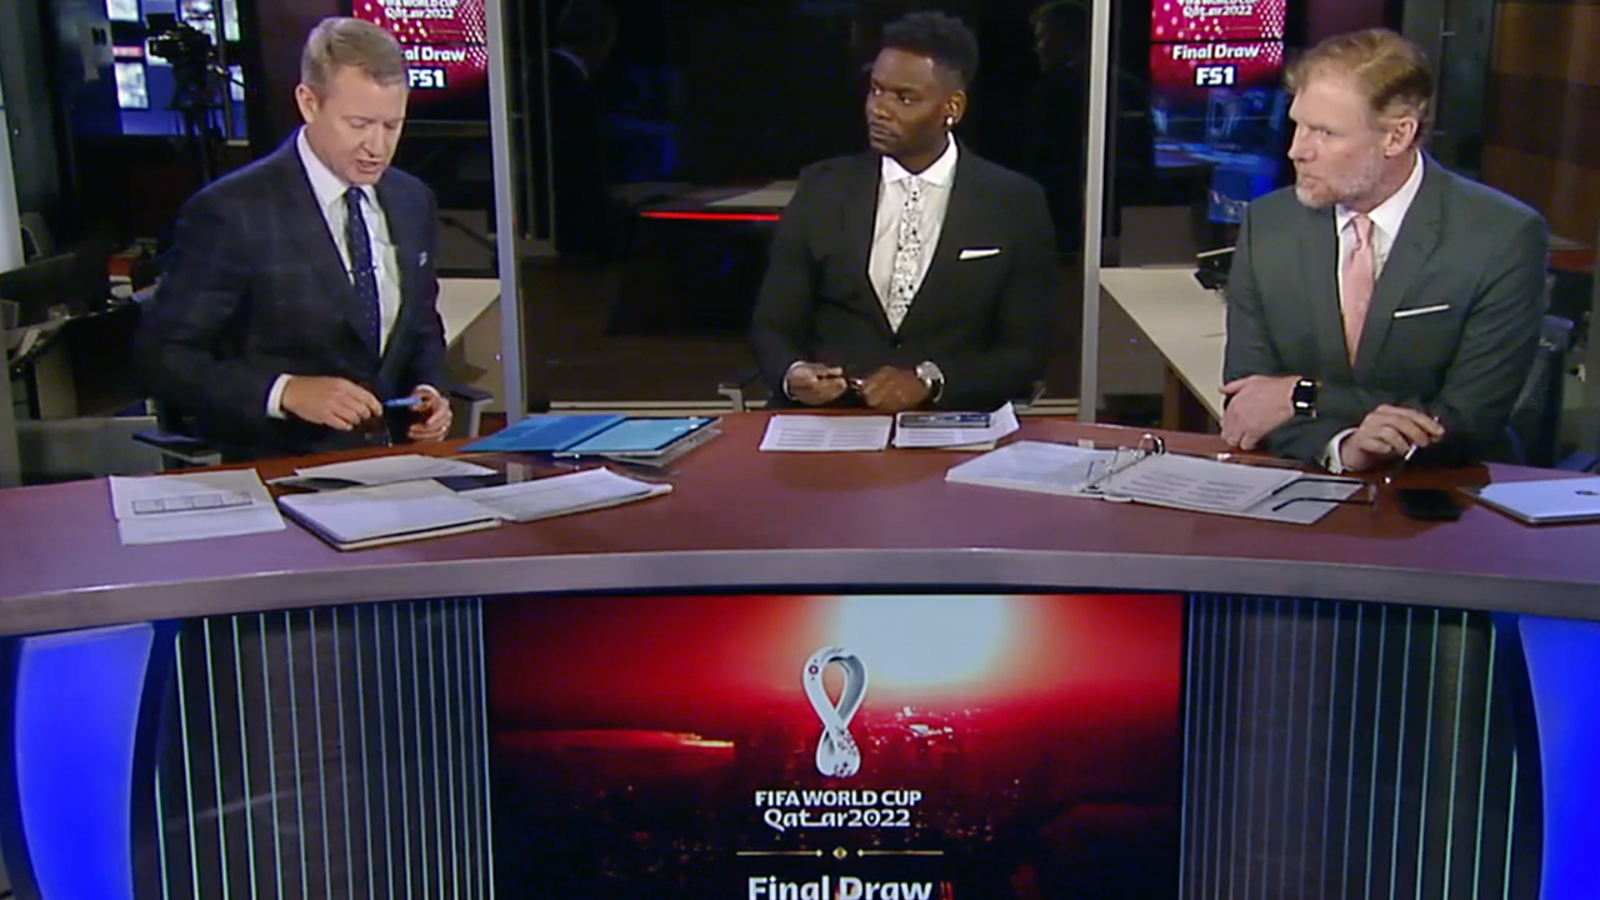 2022 FIFA World Cup: Alexi Lalas and Maurice Edu react to USMNT's group draw